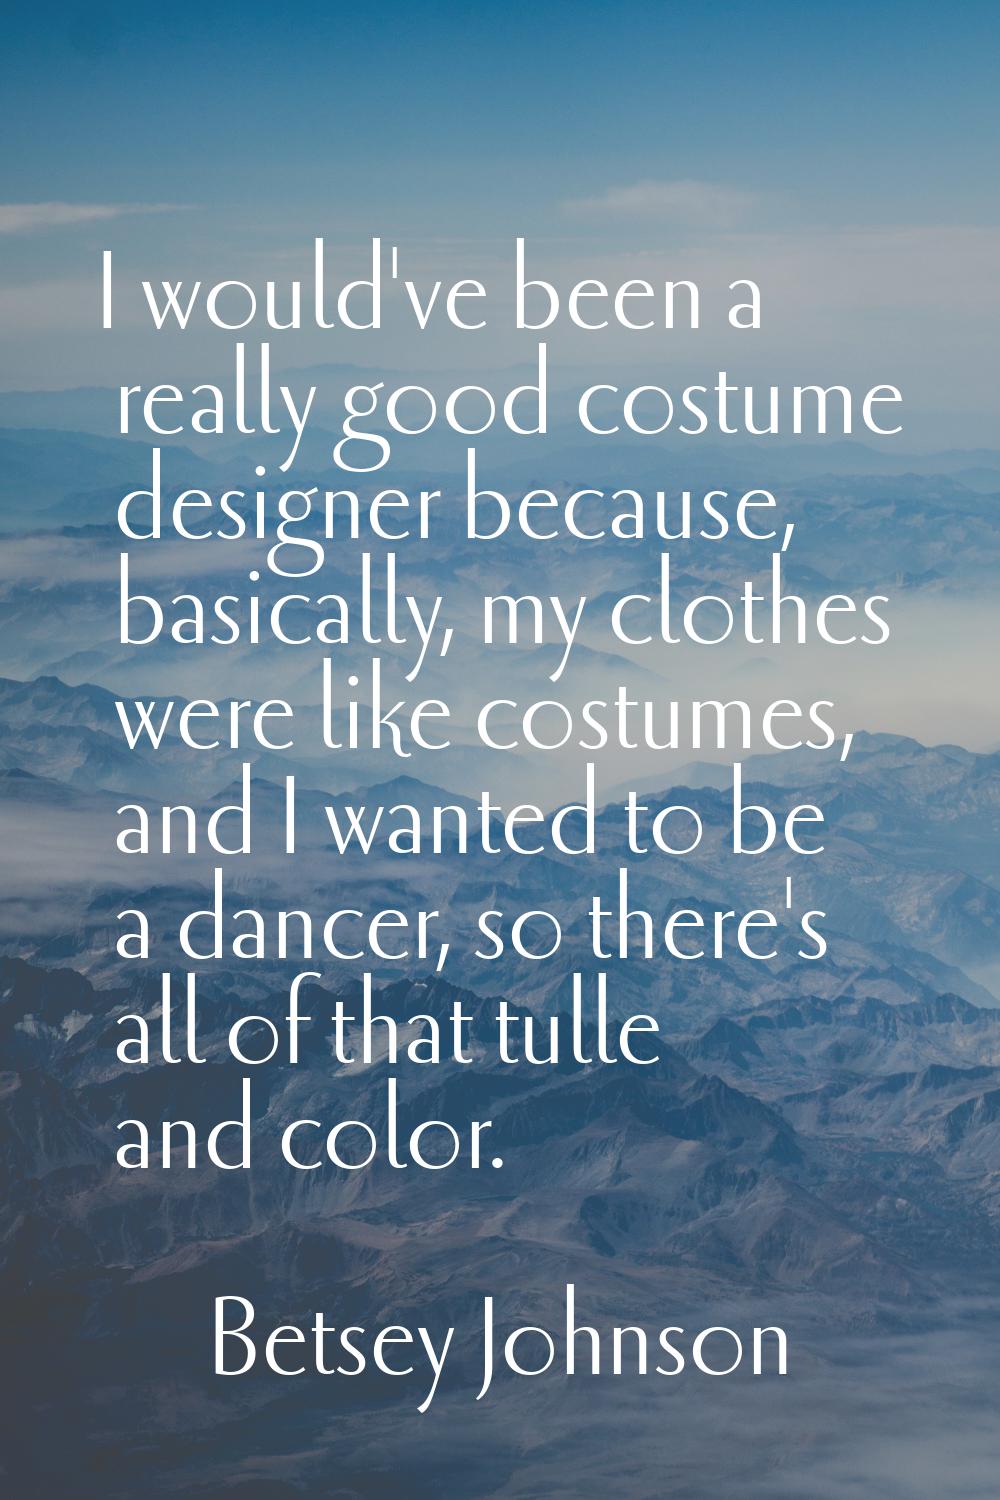 I would've been a really good costume designer because, basically, my clothes were like costumes, a